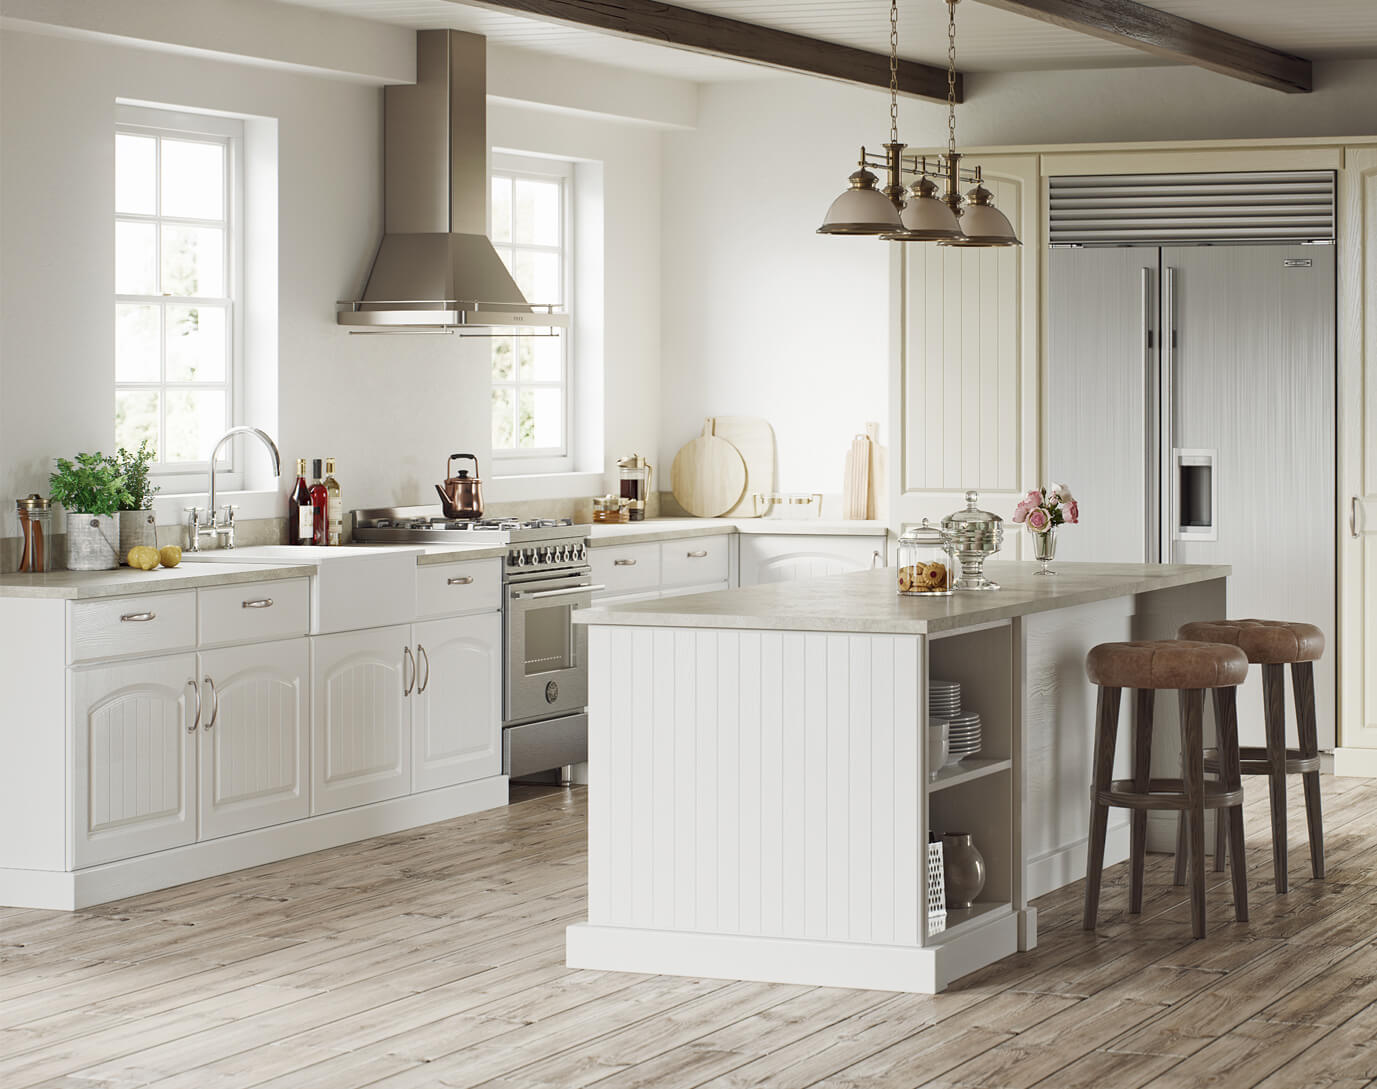 The Difference Between Rustic and Country Kitchen Styles Explained